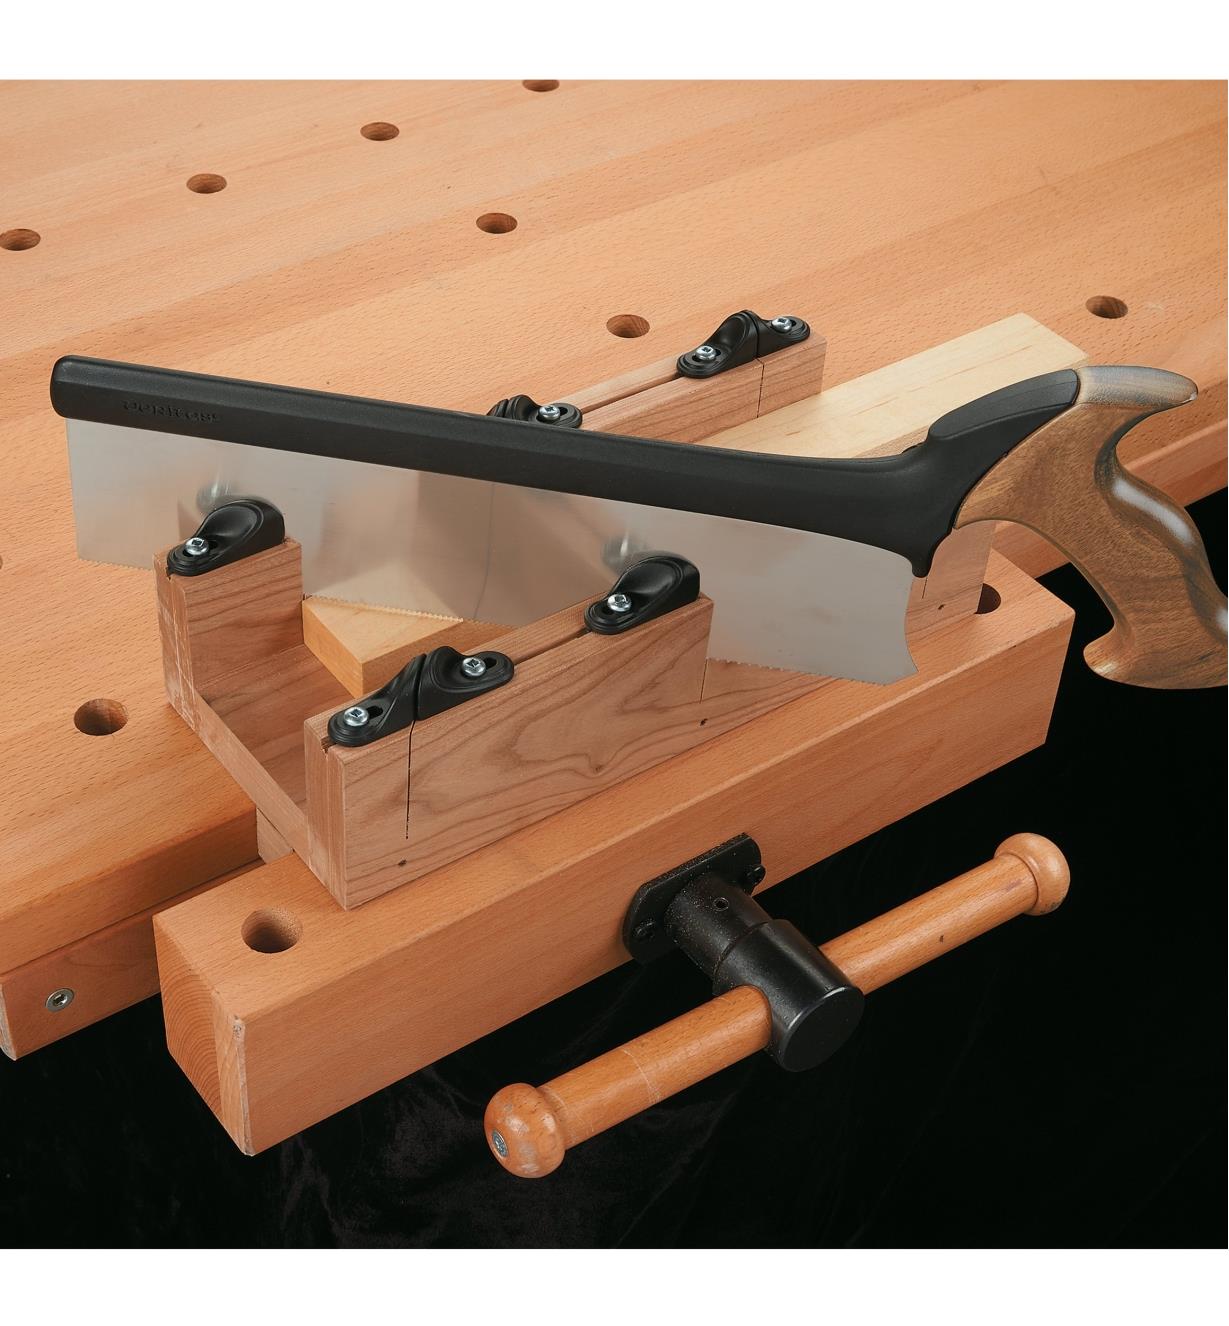 Using a completed miter box held in a workbench vise to cut wood at an angle